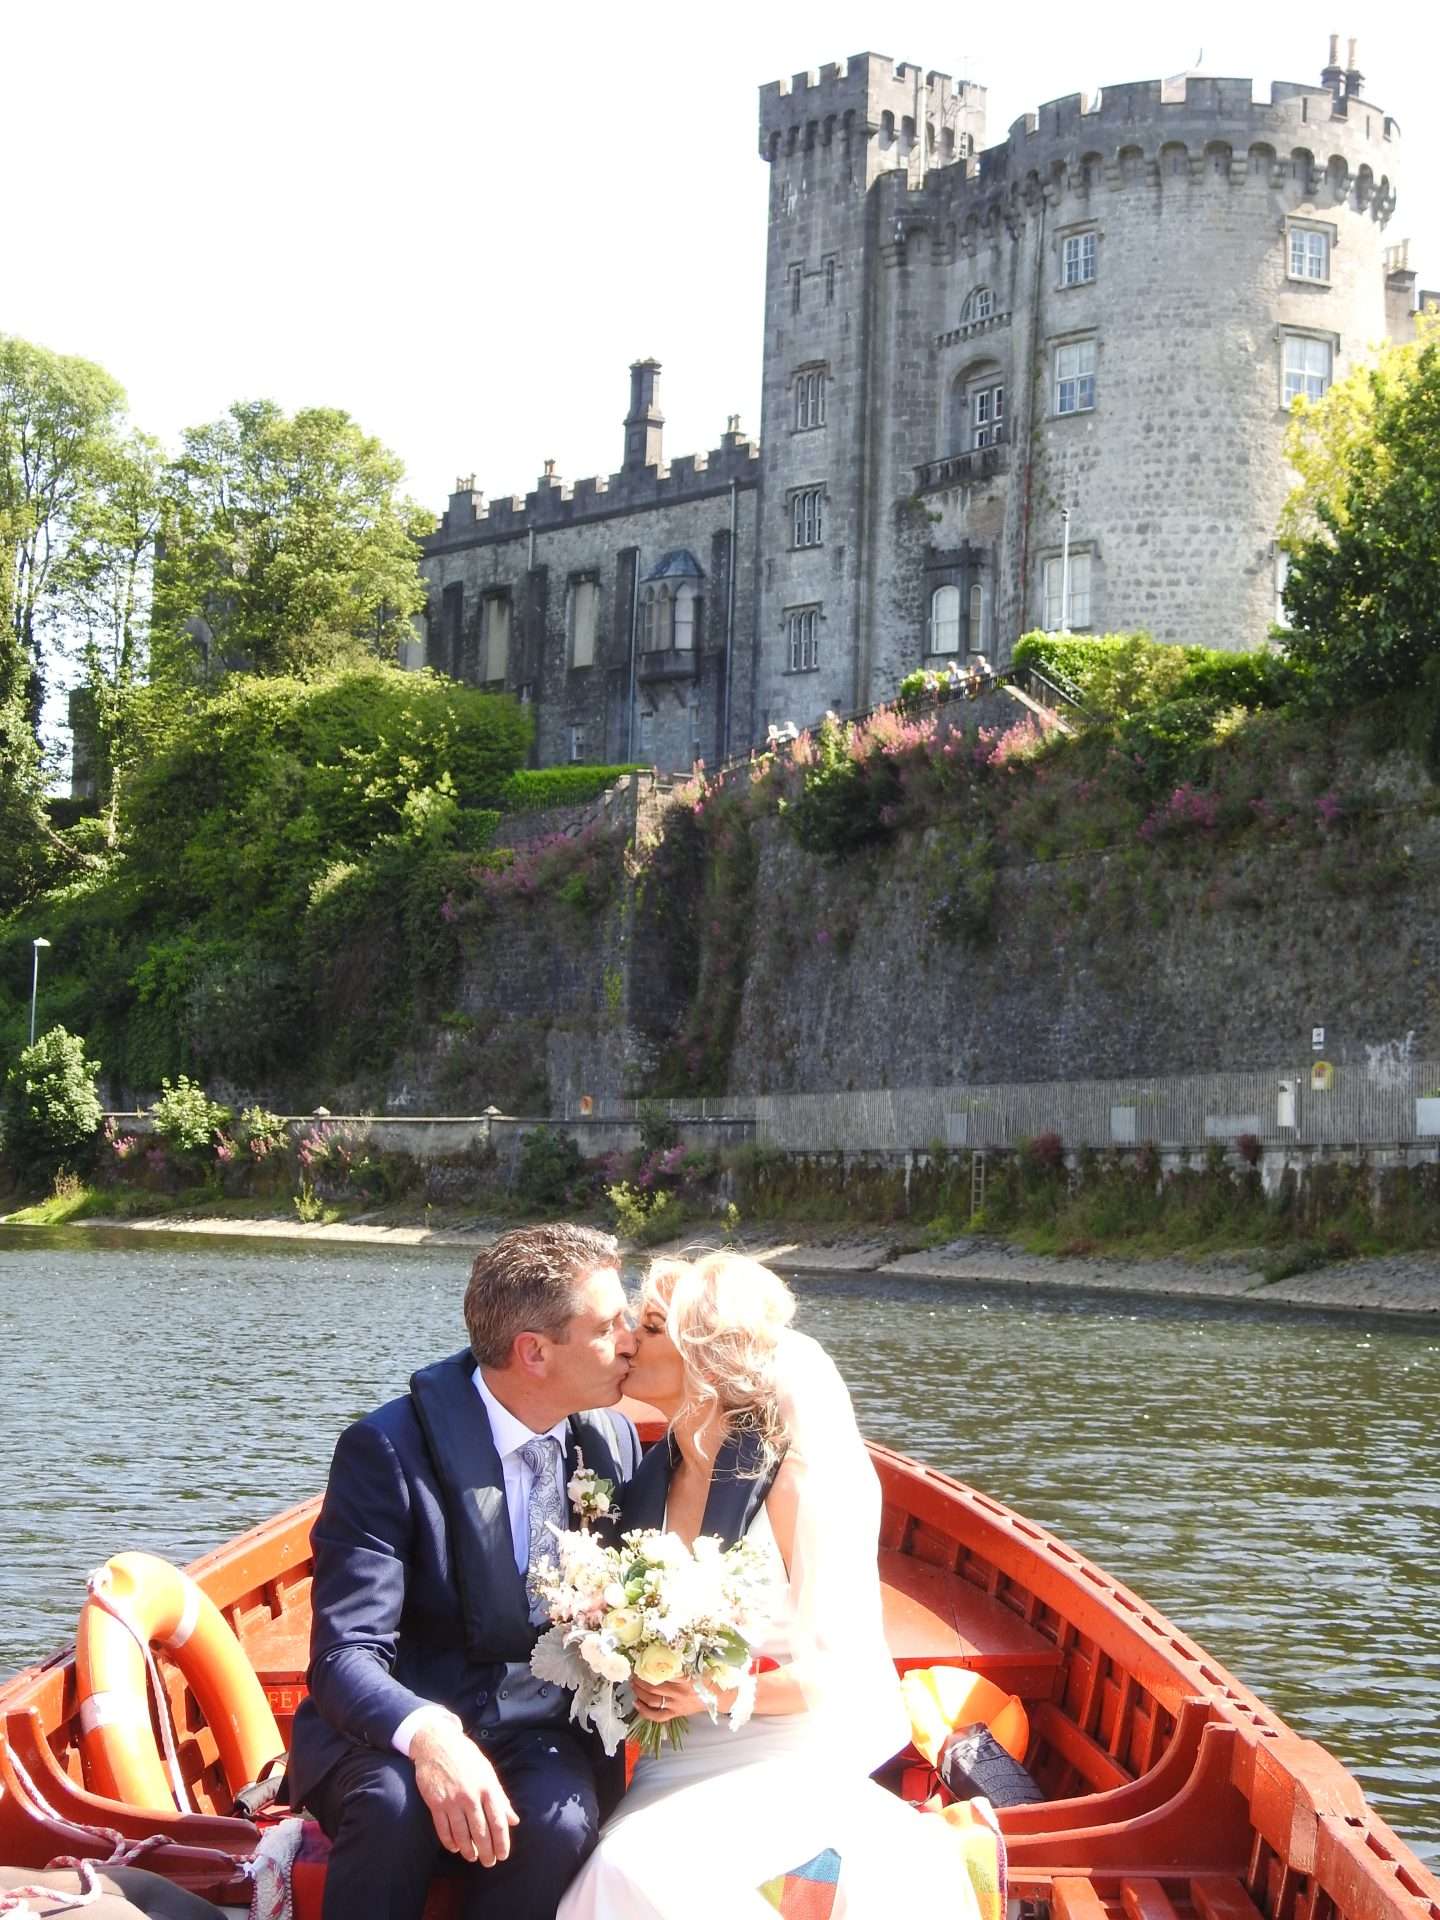 Wedding photo of newly married couple on a boat in Kilkenny city with Castle in background.